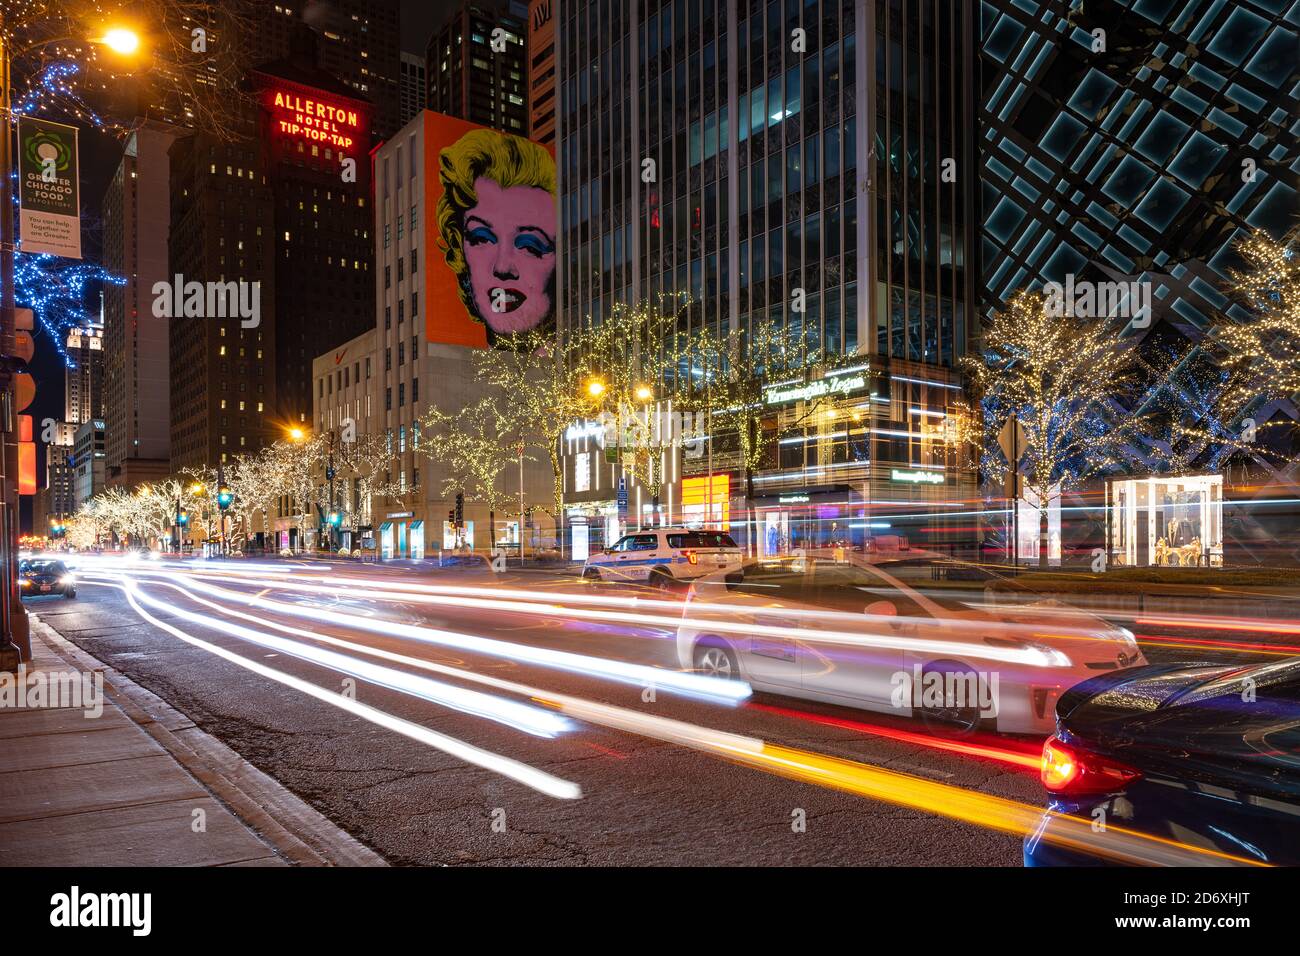 Chicago, Illinois, January 4, 2020: Mural of Andy Warhol's Marilyn Monroe in Michigan Avenue, publicizing a retrospective exhibition of Warhol's works. Stock Photo